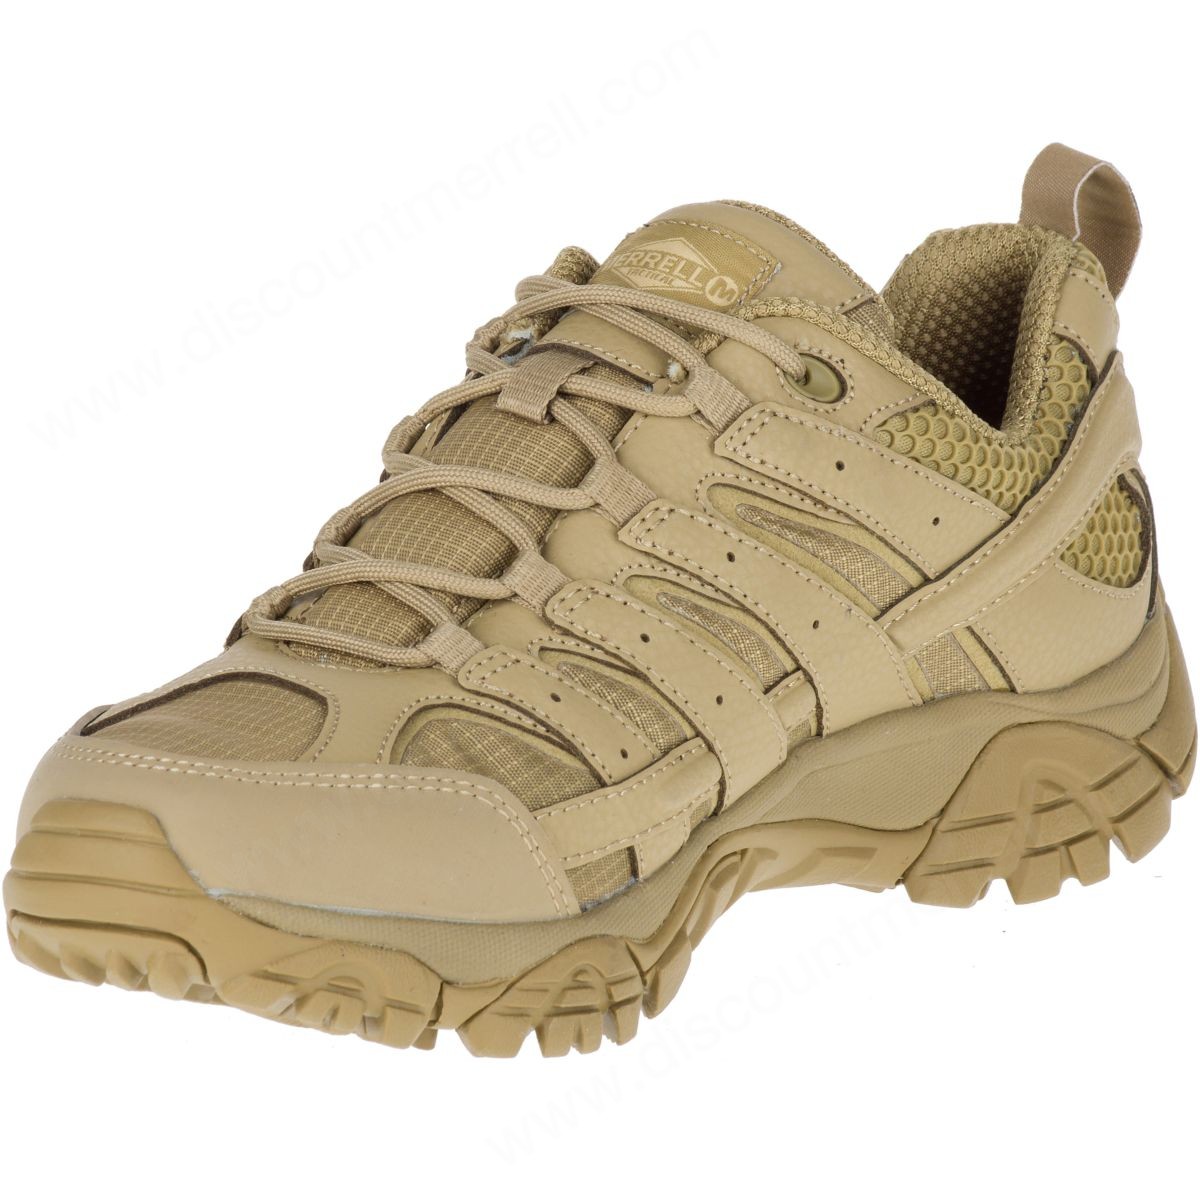 Merrell Woman's Moab Tactical Sneaker Coyote - -5